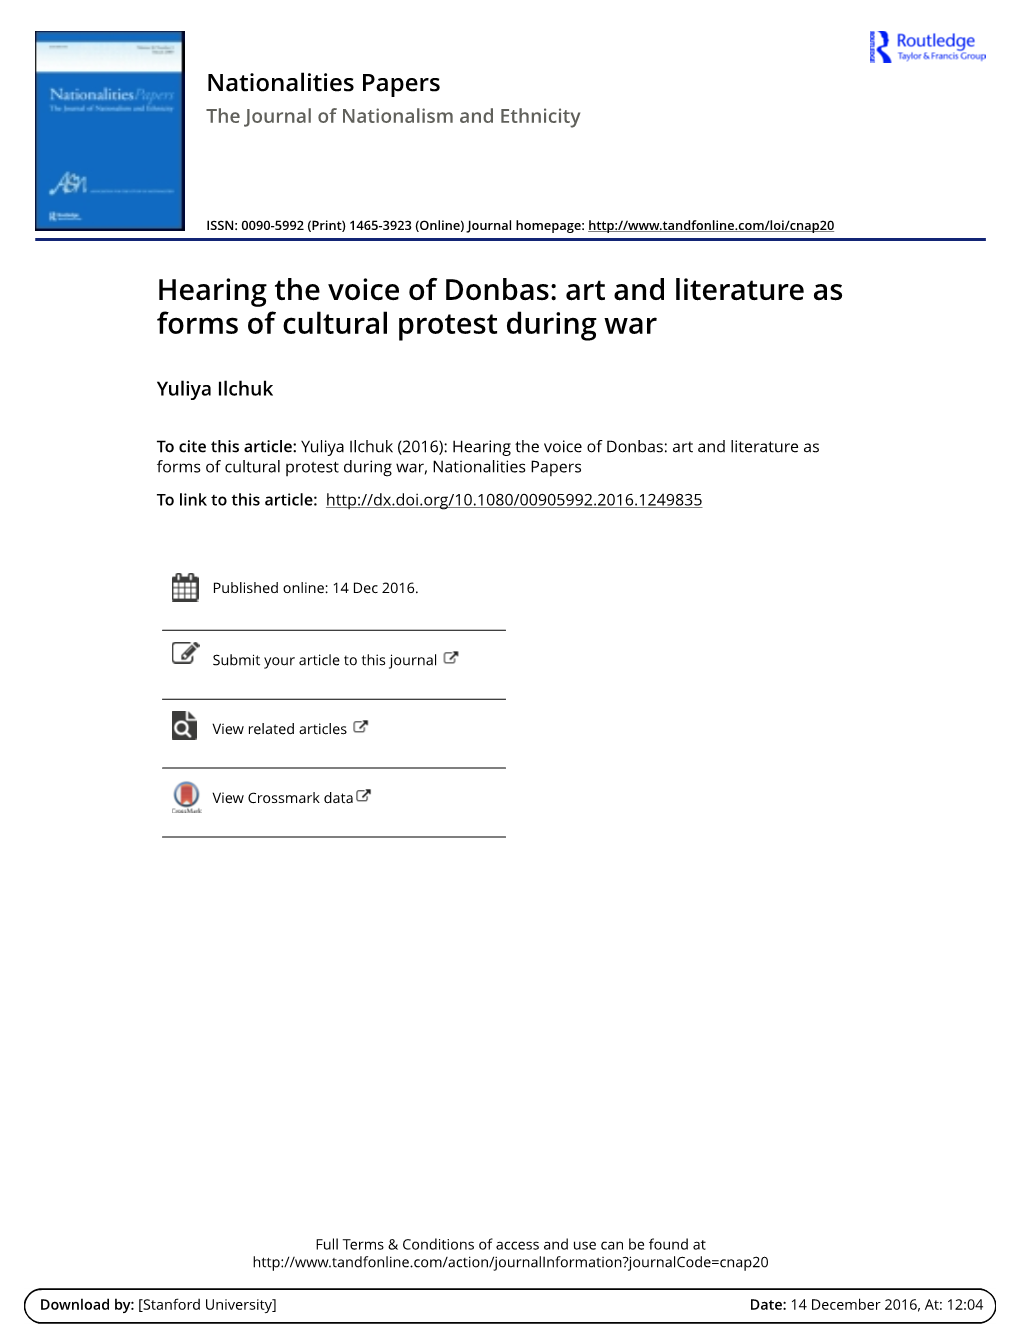 Hearing the Voice of Donbas: Art and Literature As Forms of Cultural Protest During War